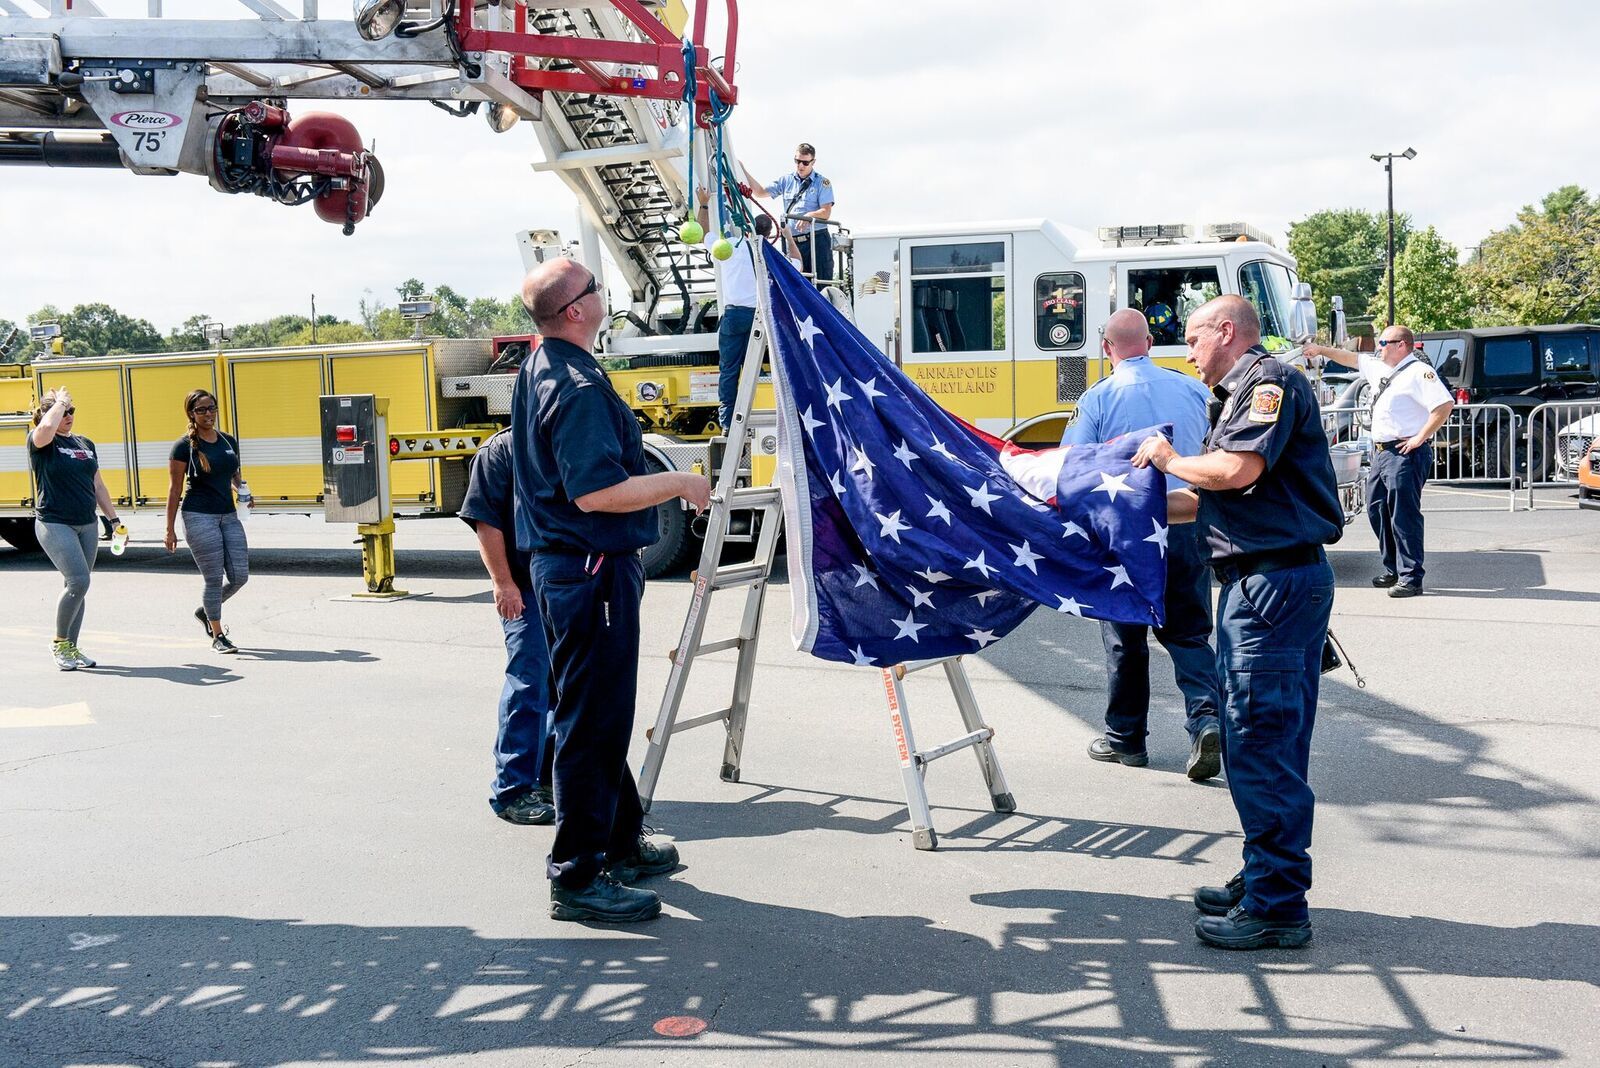 Members of the Annapolis Fire Department and the Naval District of Washington Fire Department Naval Academy Station work to put up the ladder arc flag. (Courtesy Megan Evans Photography)